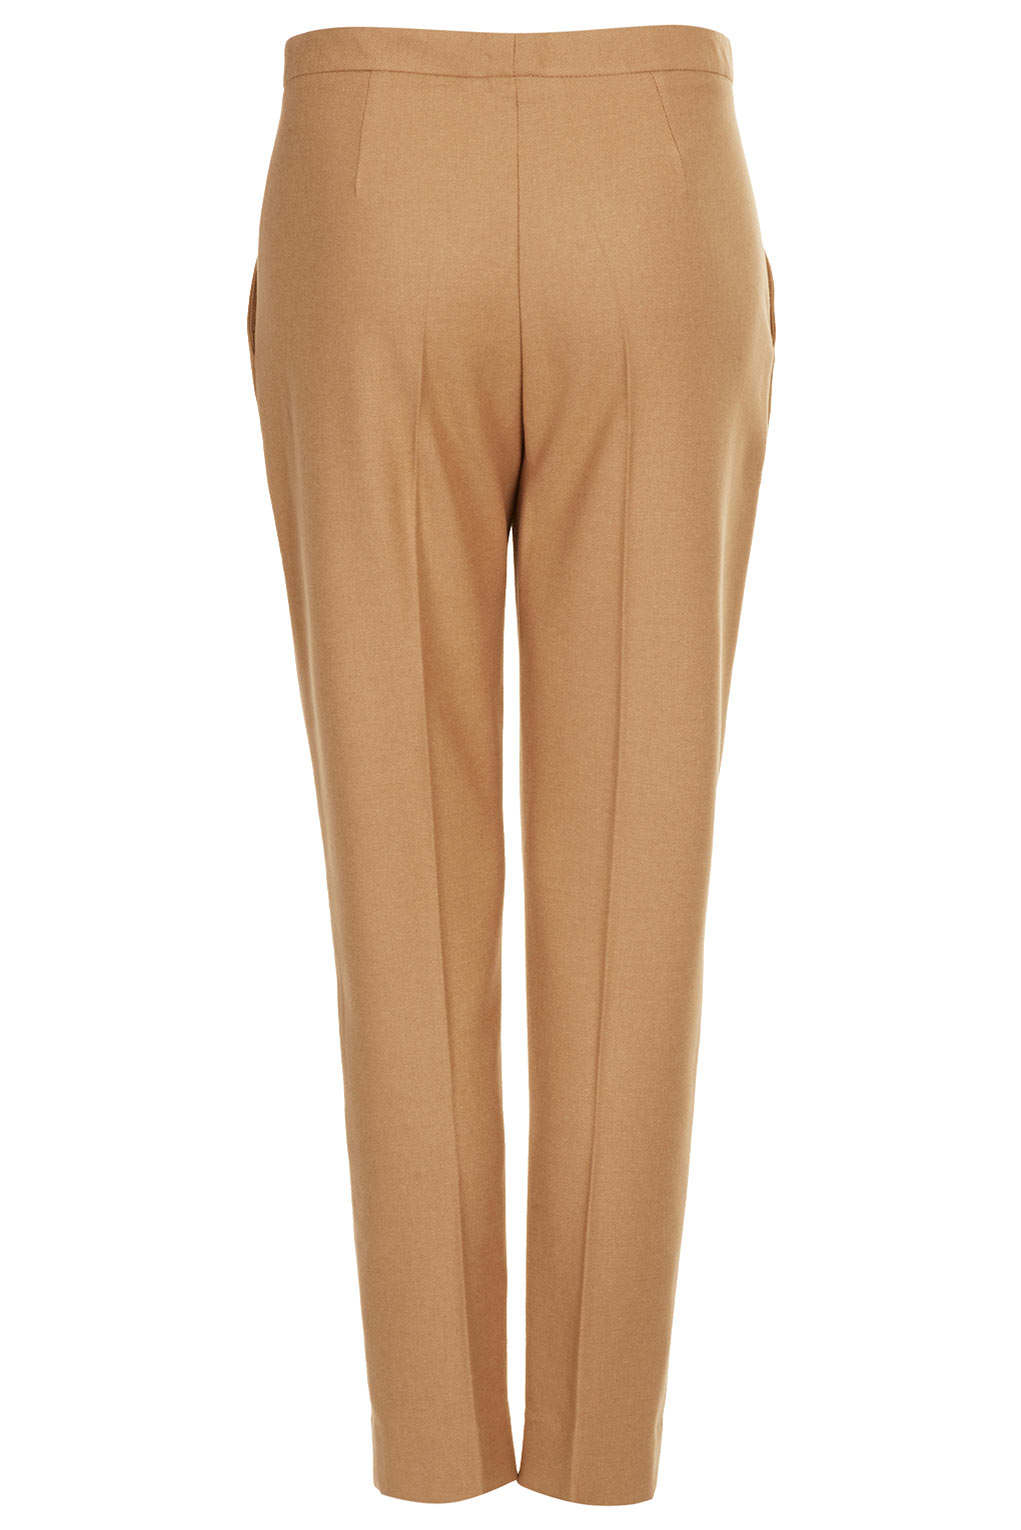 Topshop Camel Wool Trousers By Unique in Natural | Lyst